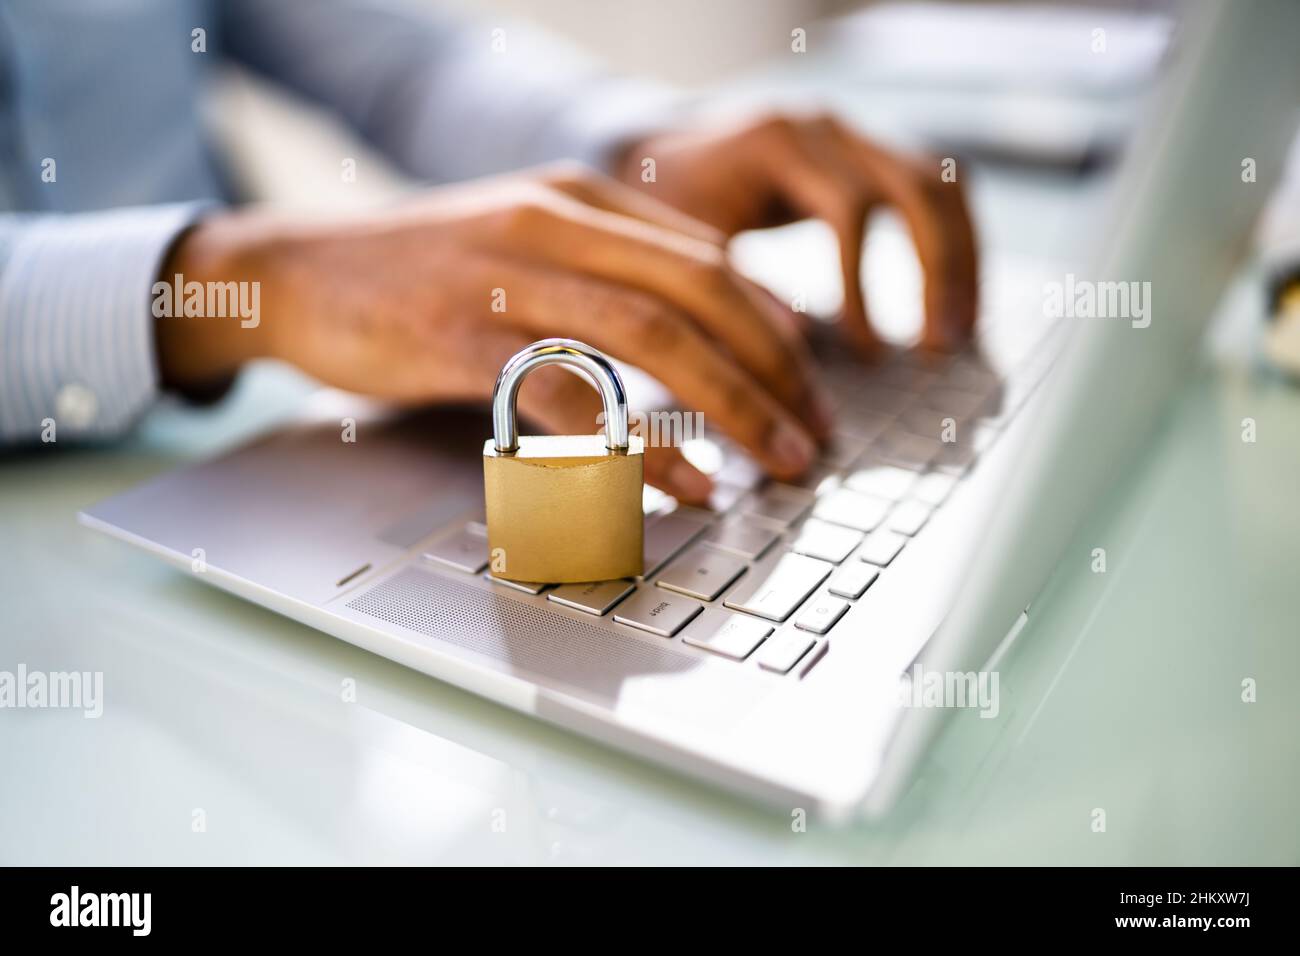 Laptop Data Privacy And Computer Cyber Security Risk Stock Photo